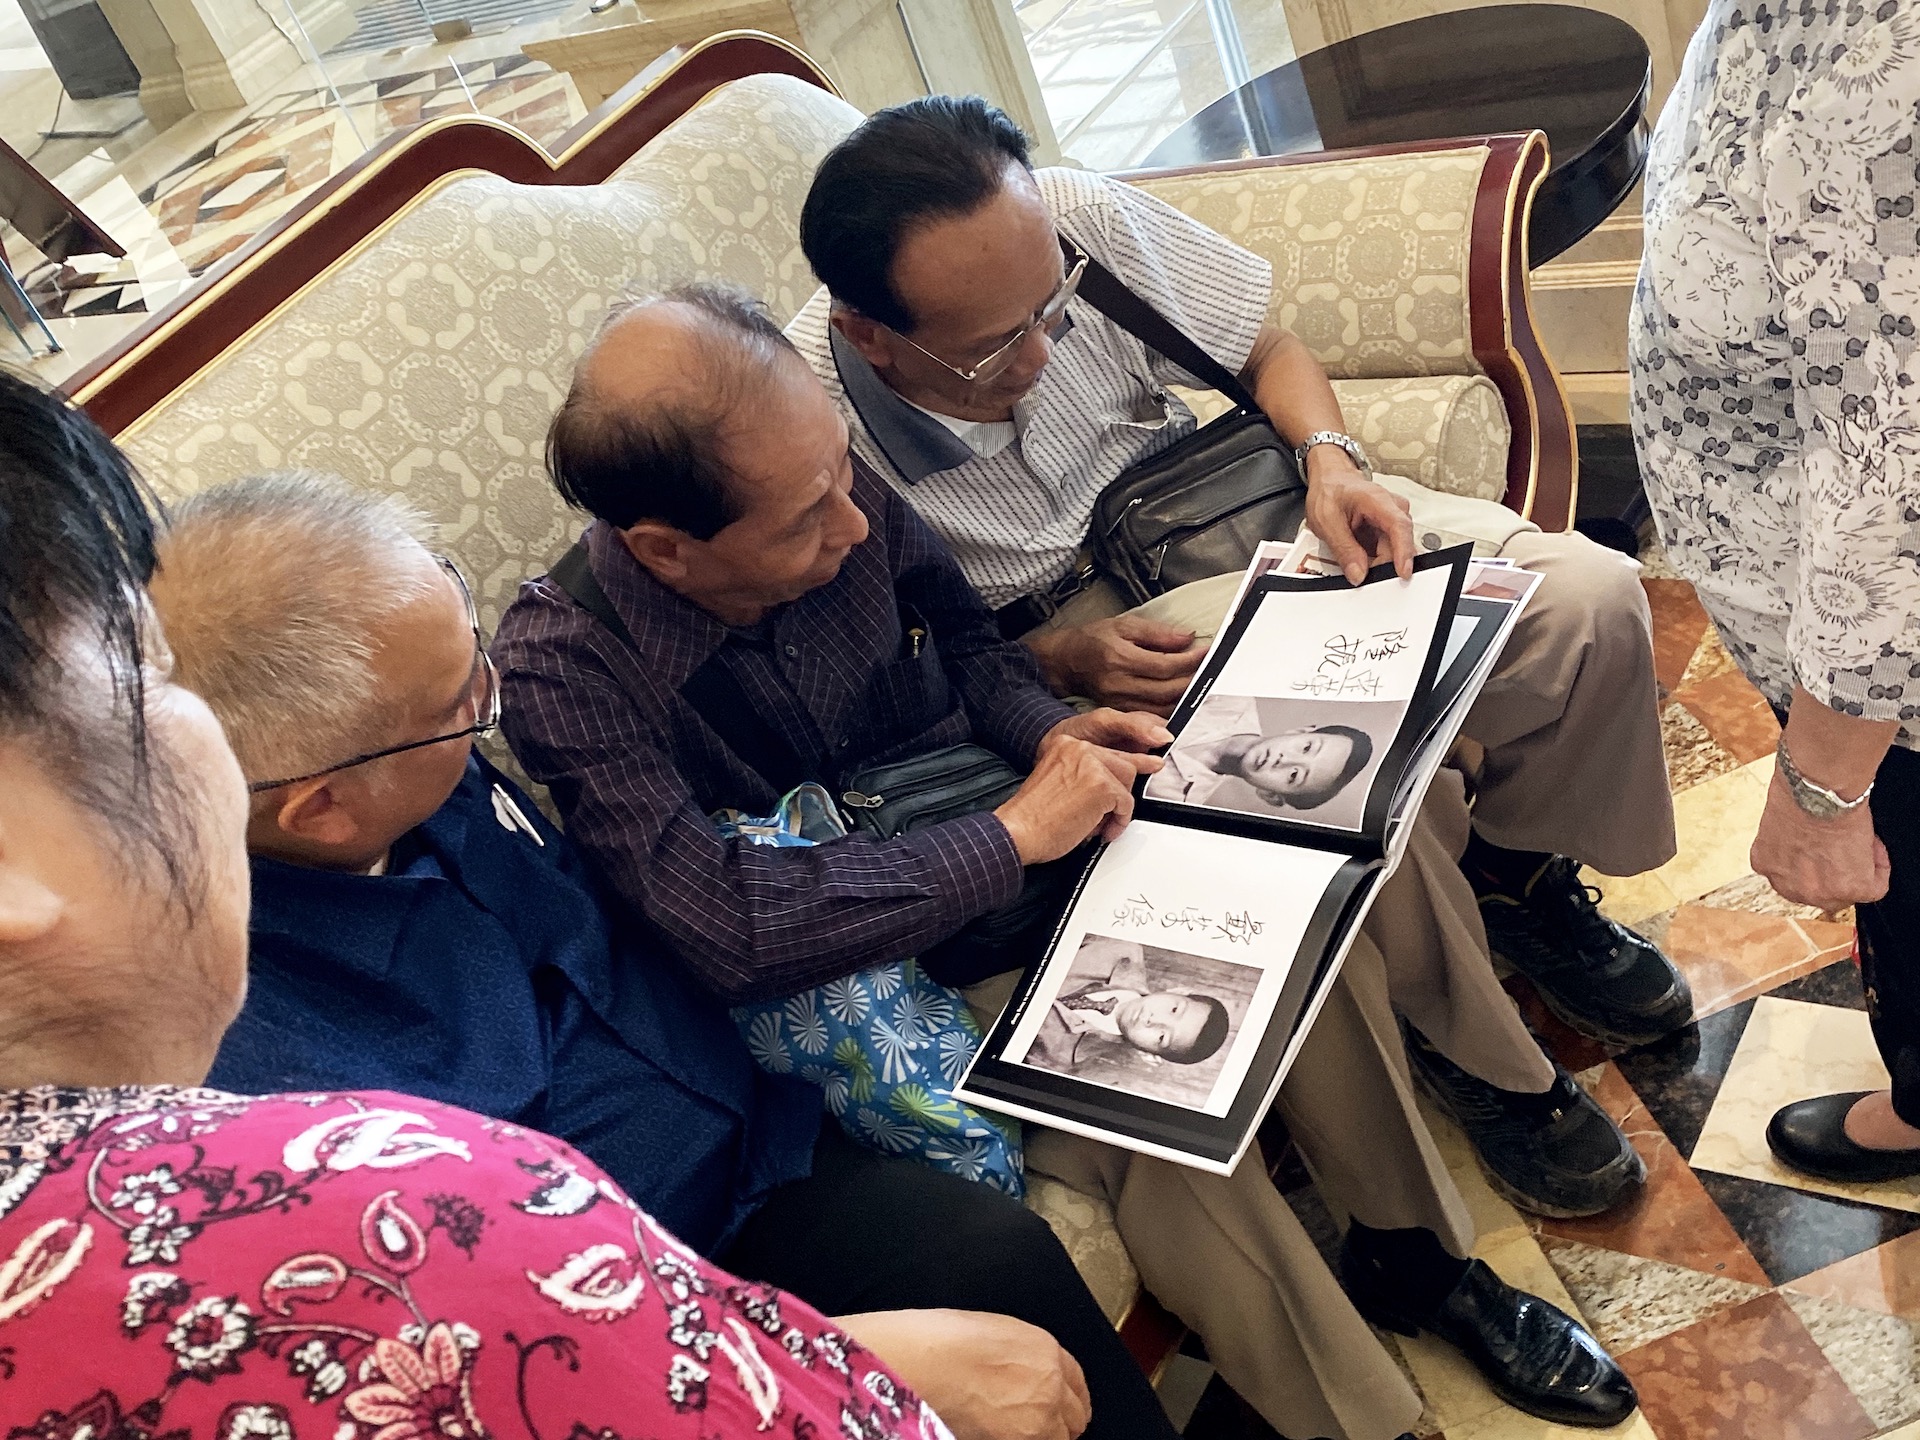 Reunited relatives reading their family history photo-book together